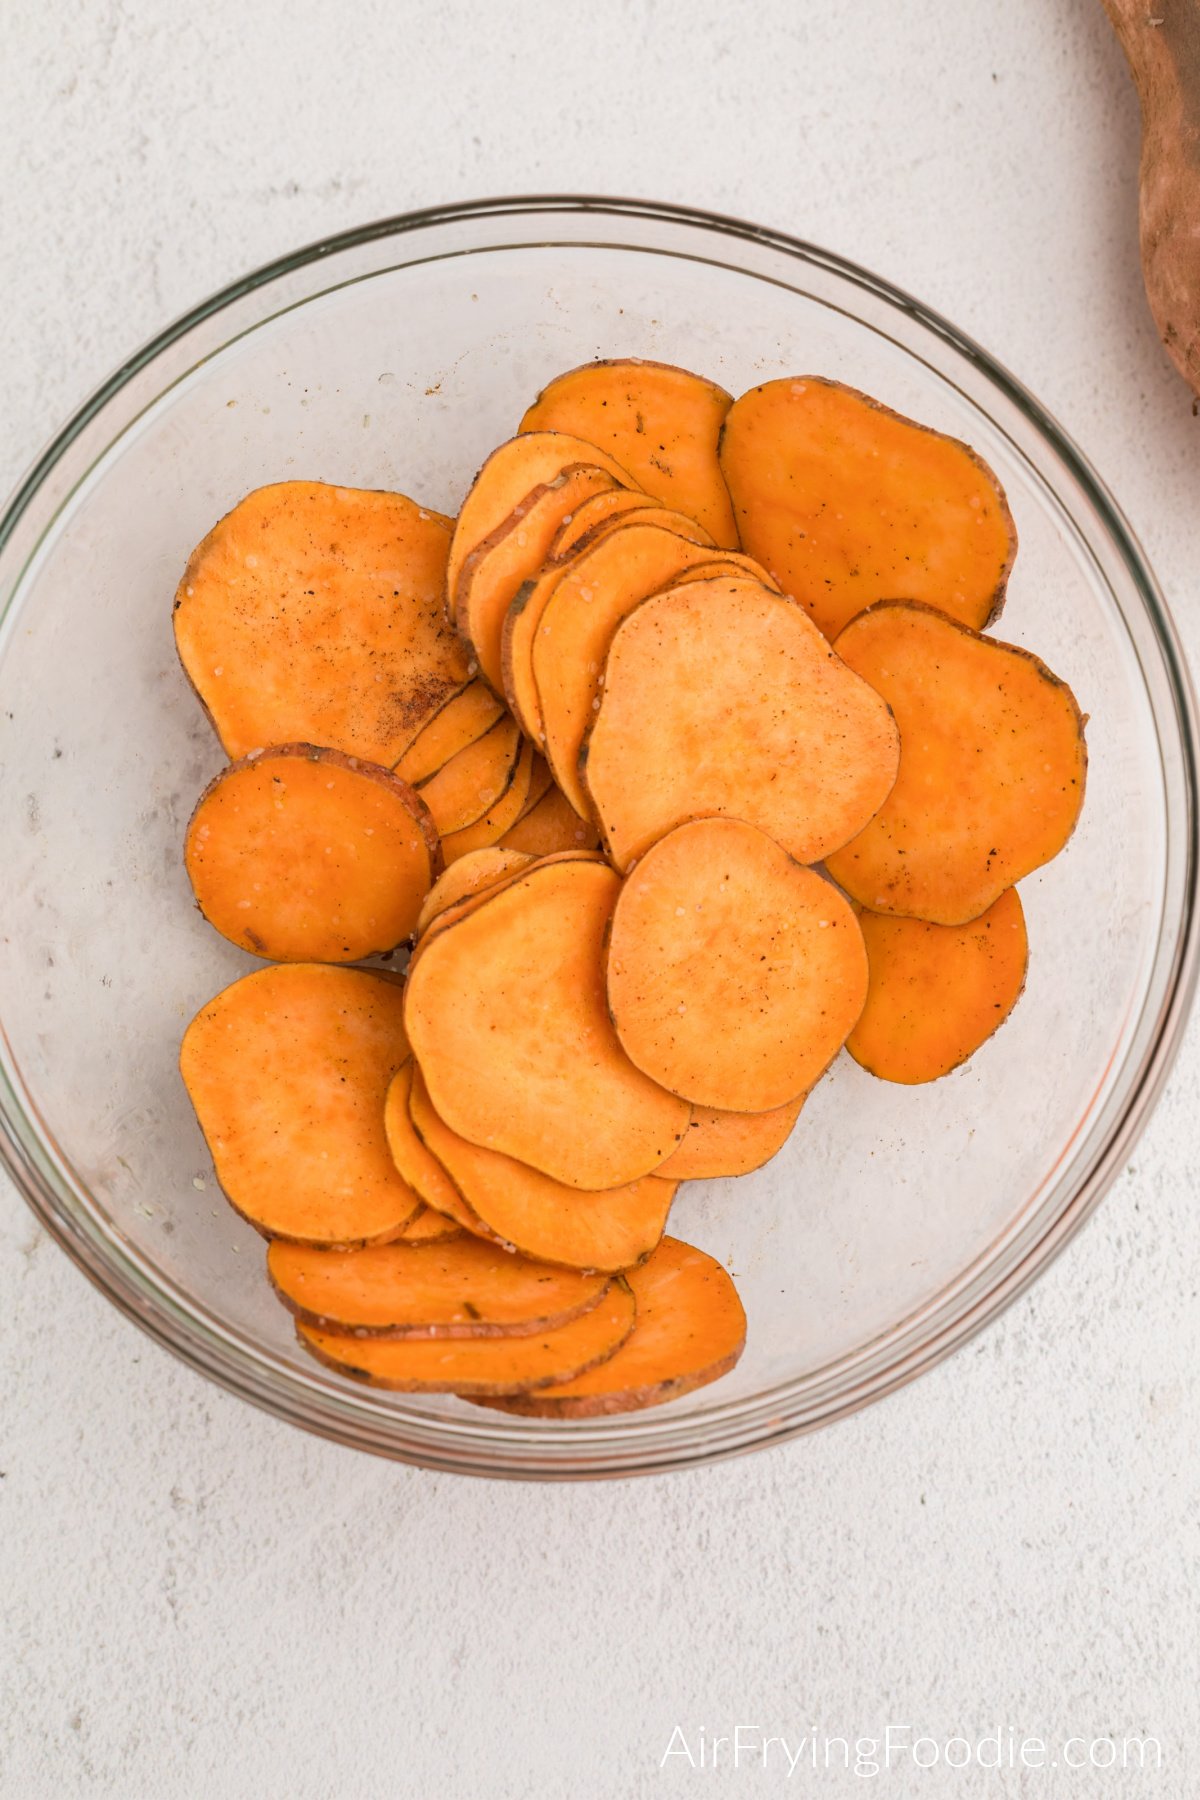 Sliced sweet potatoes in a glass bowl coated with olive oil and seasonings.